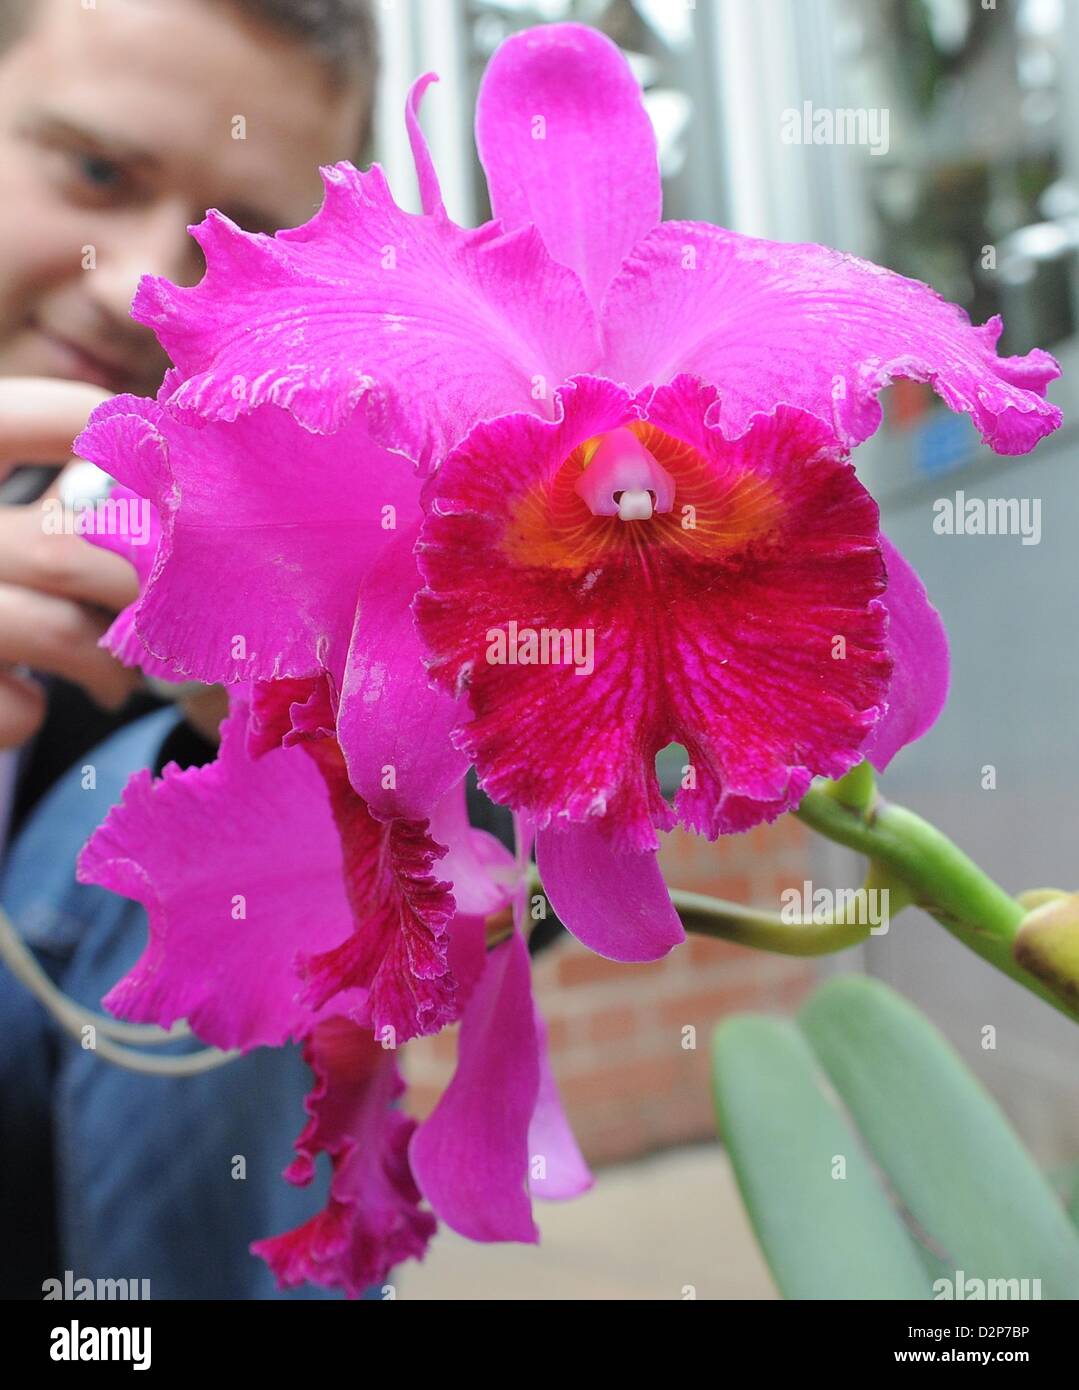 A man takes pictures of an orchid of the species cattleya in the orchid exhibition in the botanic gardens in  Potsdam, Germany, 30 January 2013. The exhibition features a variety of wild and grown orchid plants. Orchids are considered the second largest family of plants with more than 18.500 species. Photo: Bernd Settnik Stock Photo